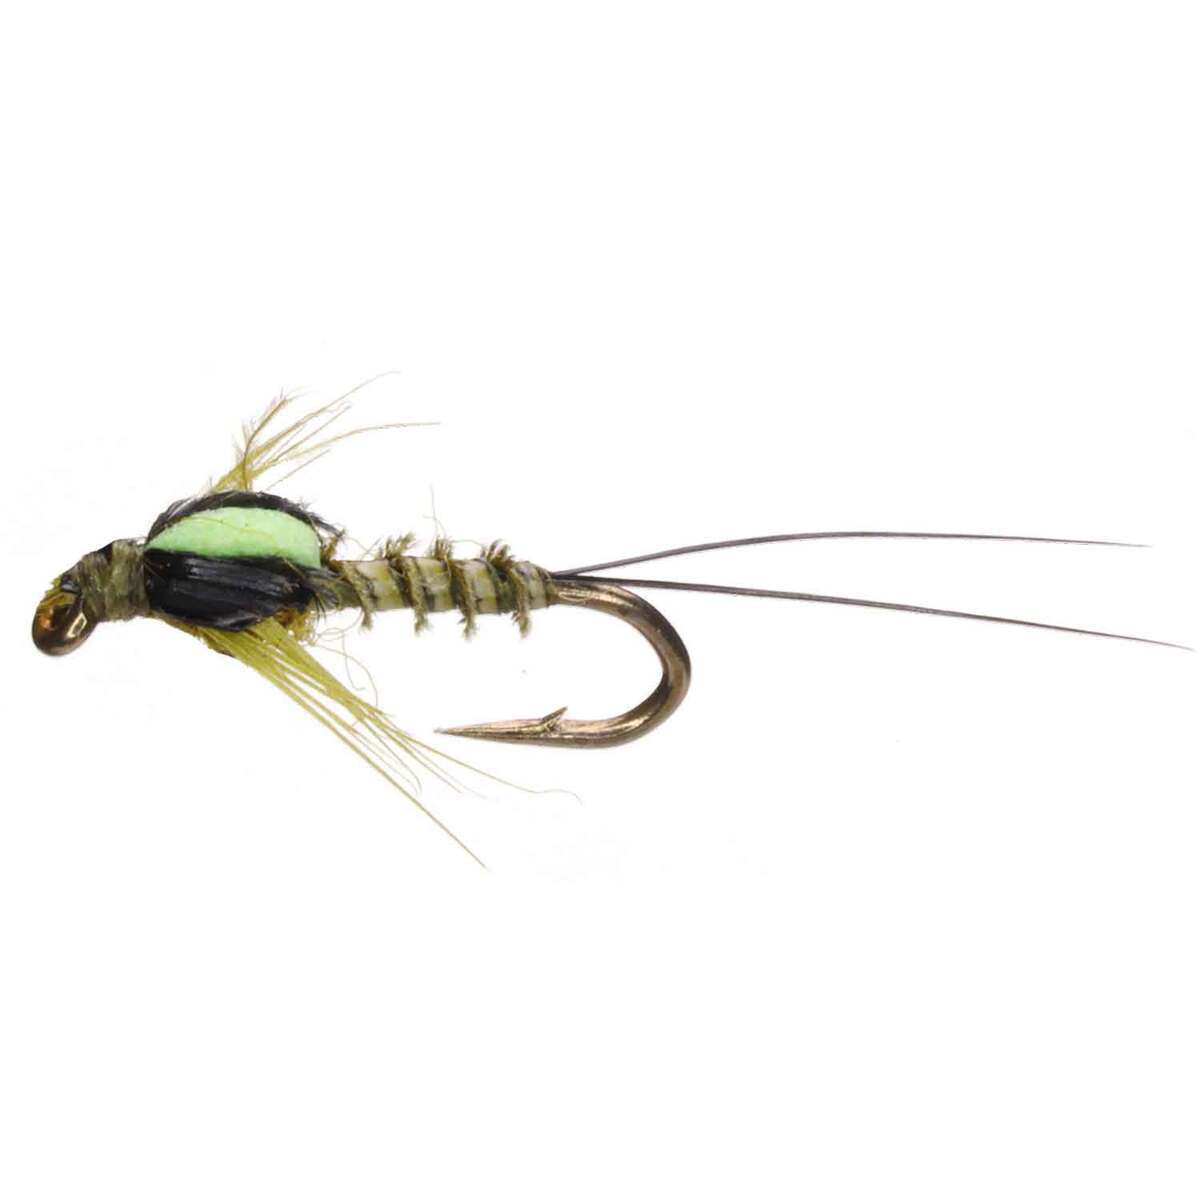 RoundRocks Cracked BWO Nymph Fly - 6 Pack - Green 6 by Sportsman's Warehouse